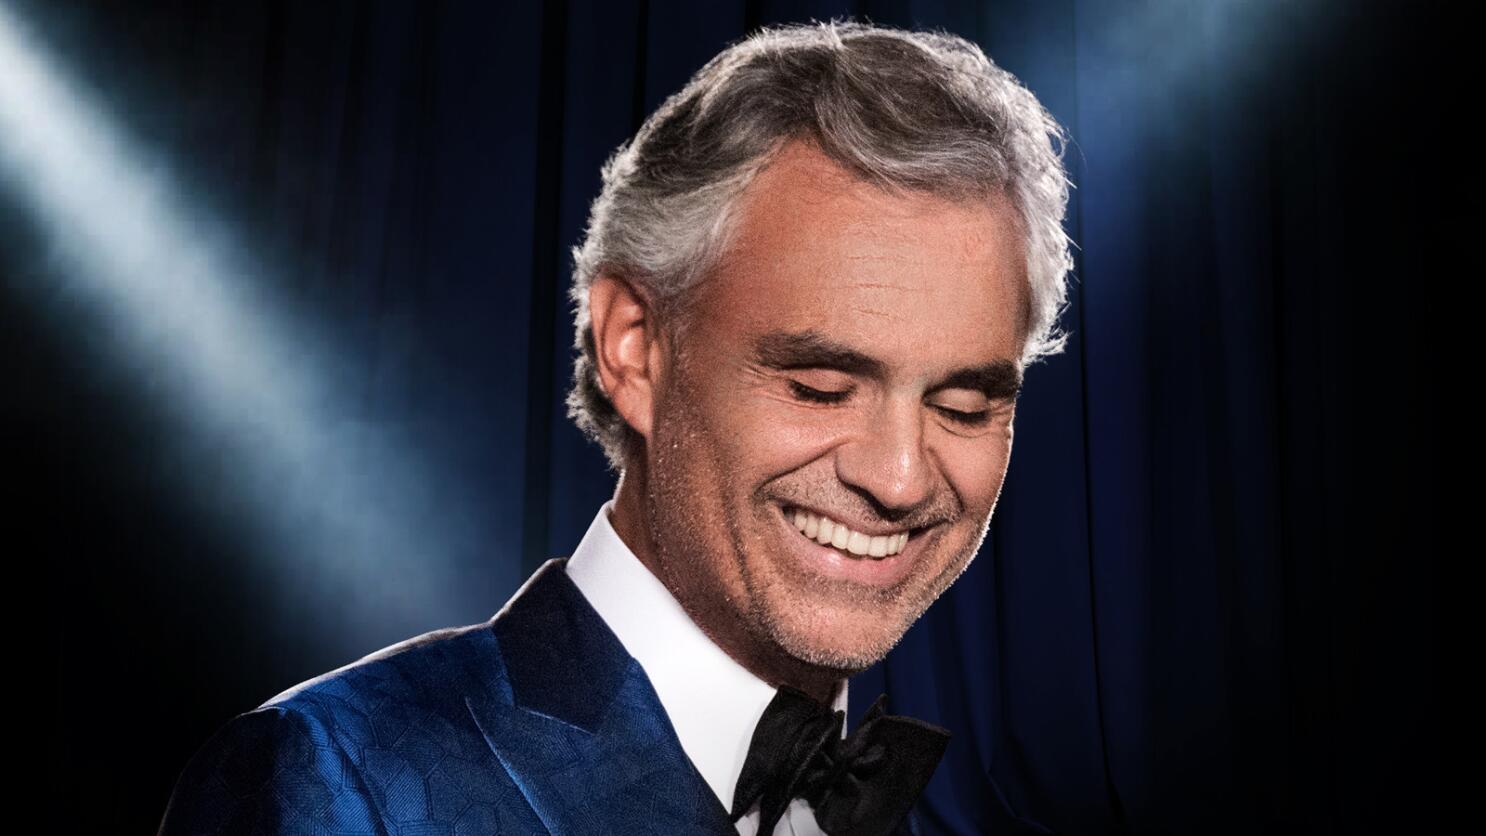 Review: Andrea Bocelli, From Cradle to Stage in 'The Music of Silence' -  The New York Times